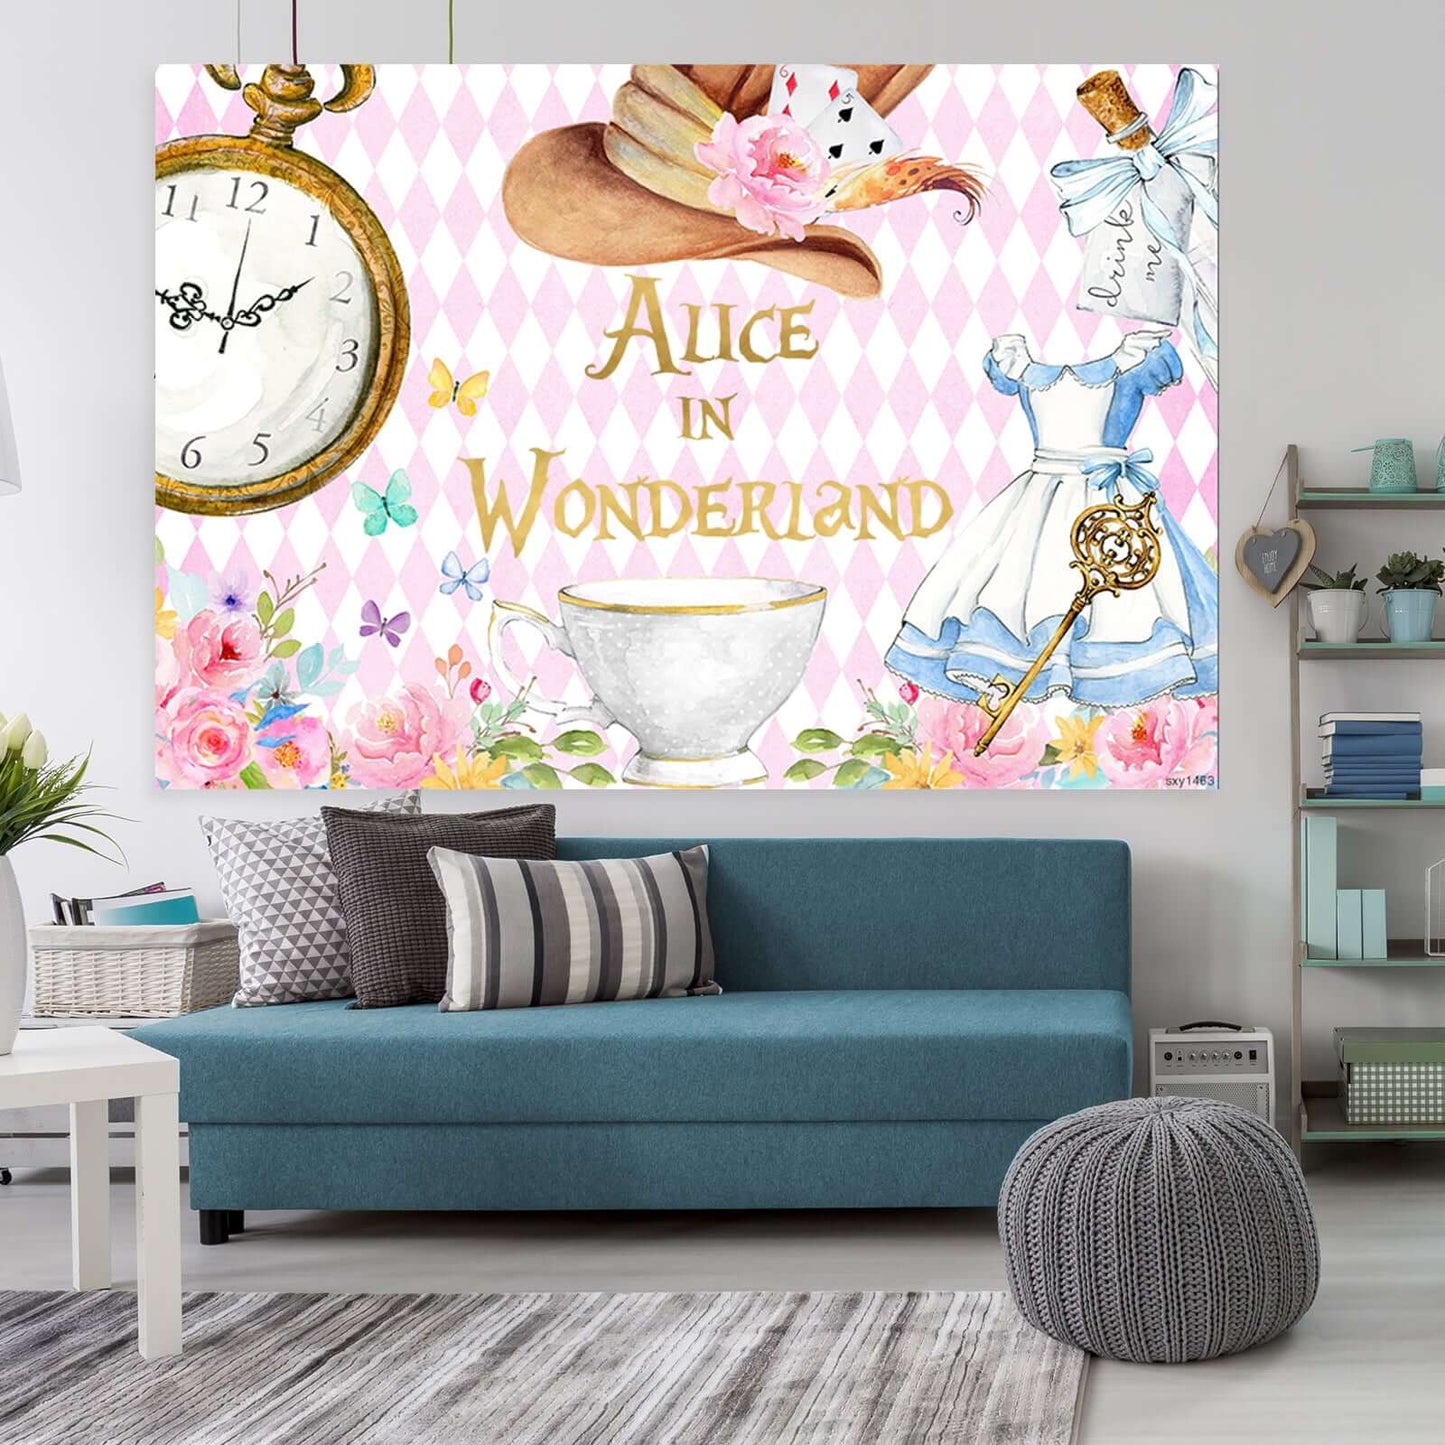 Sensfun Girl Baby Shower Photography Background Alice in Wonderland Birthday Party Backdrop for Photo Studio Props Cake Table Decor